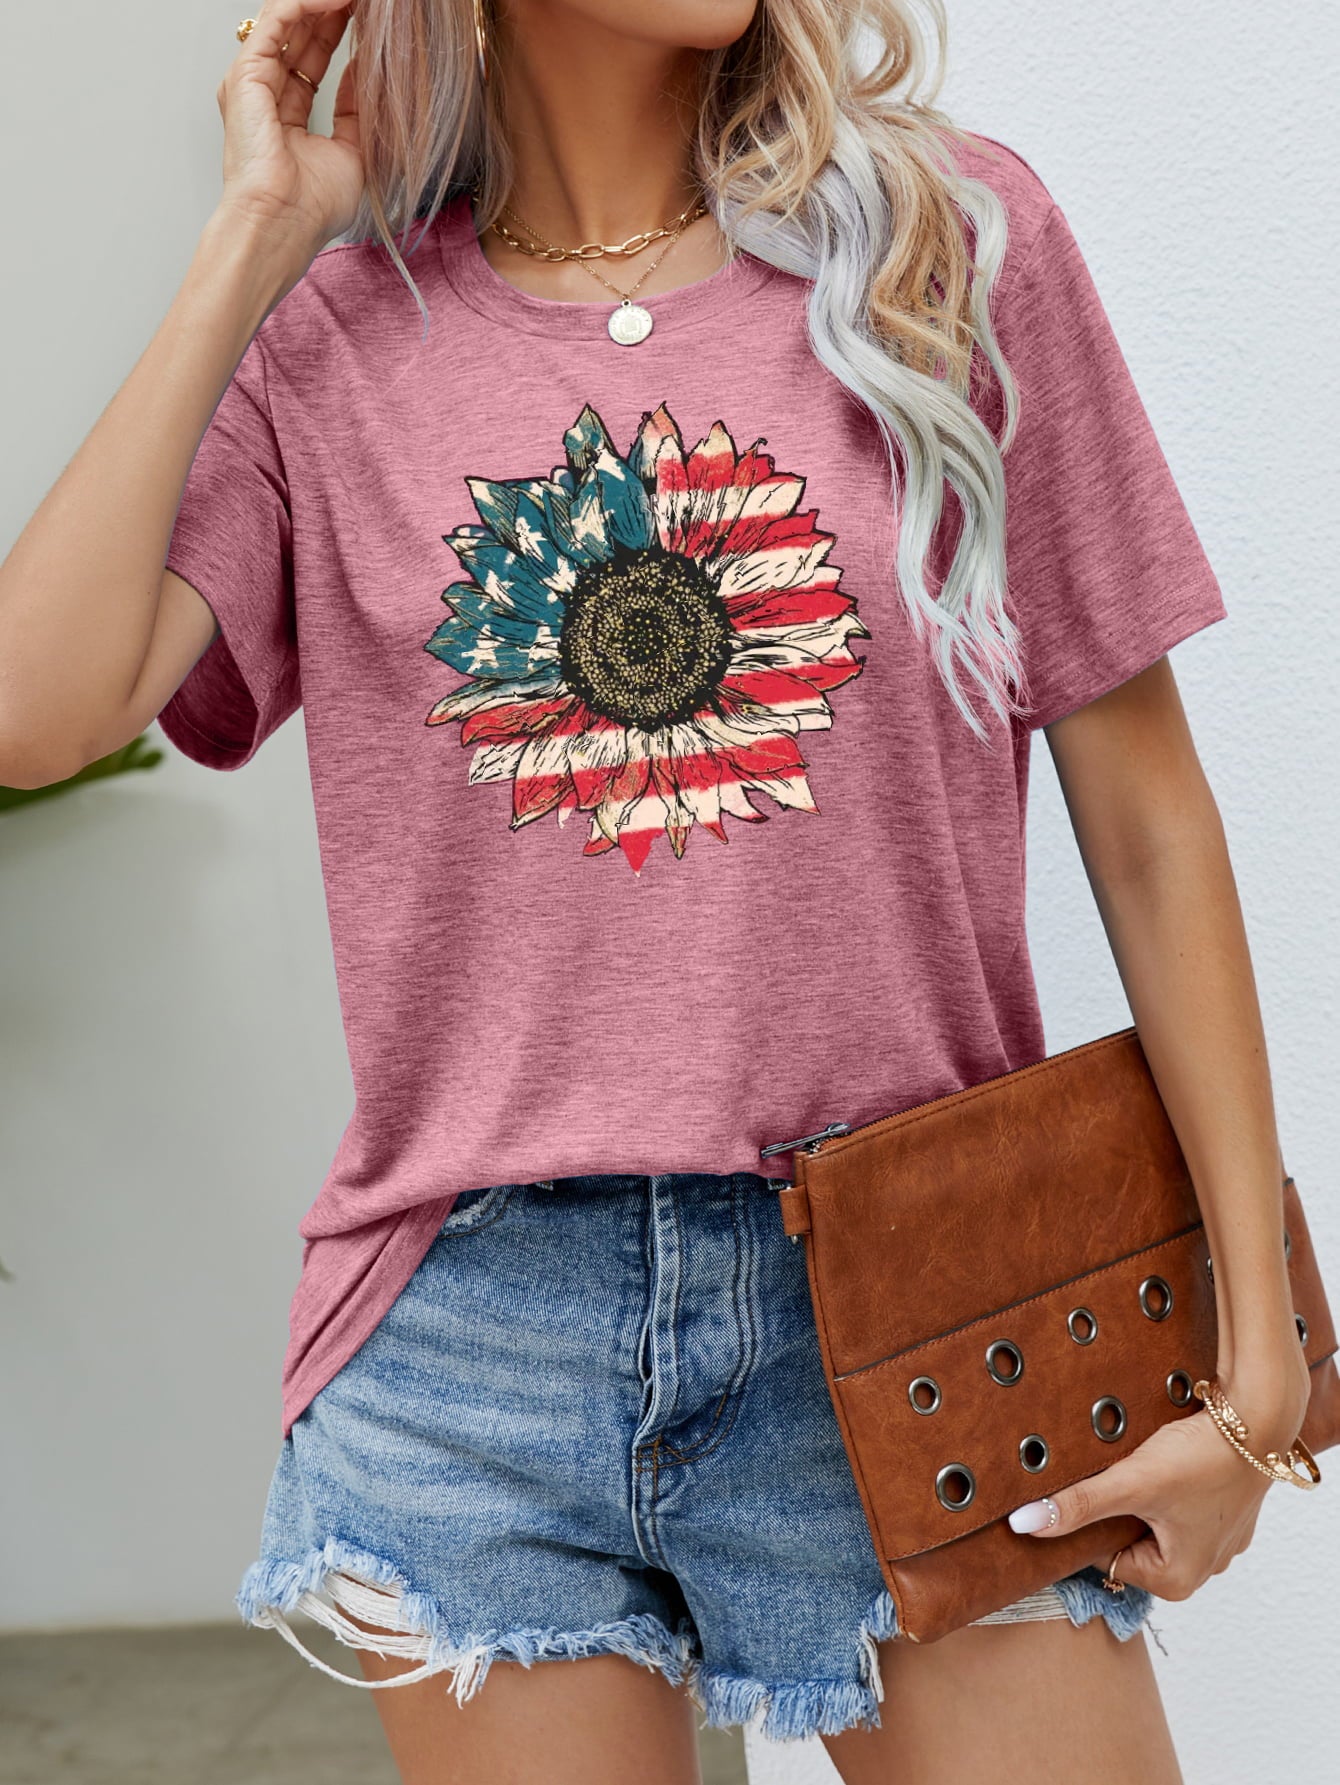 US Flag Flower Graphic Tee (5 Colors)  Krazy Heart Designs Boutique Dusty Pink S 